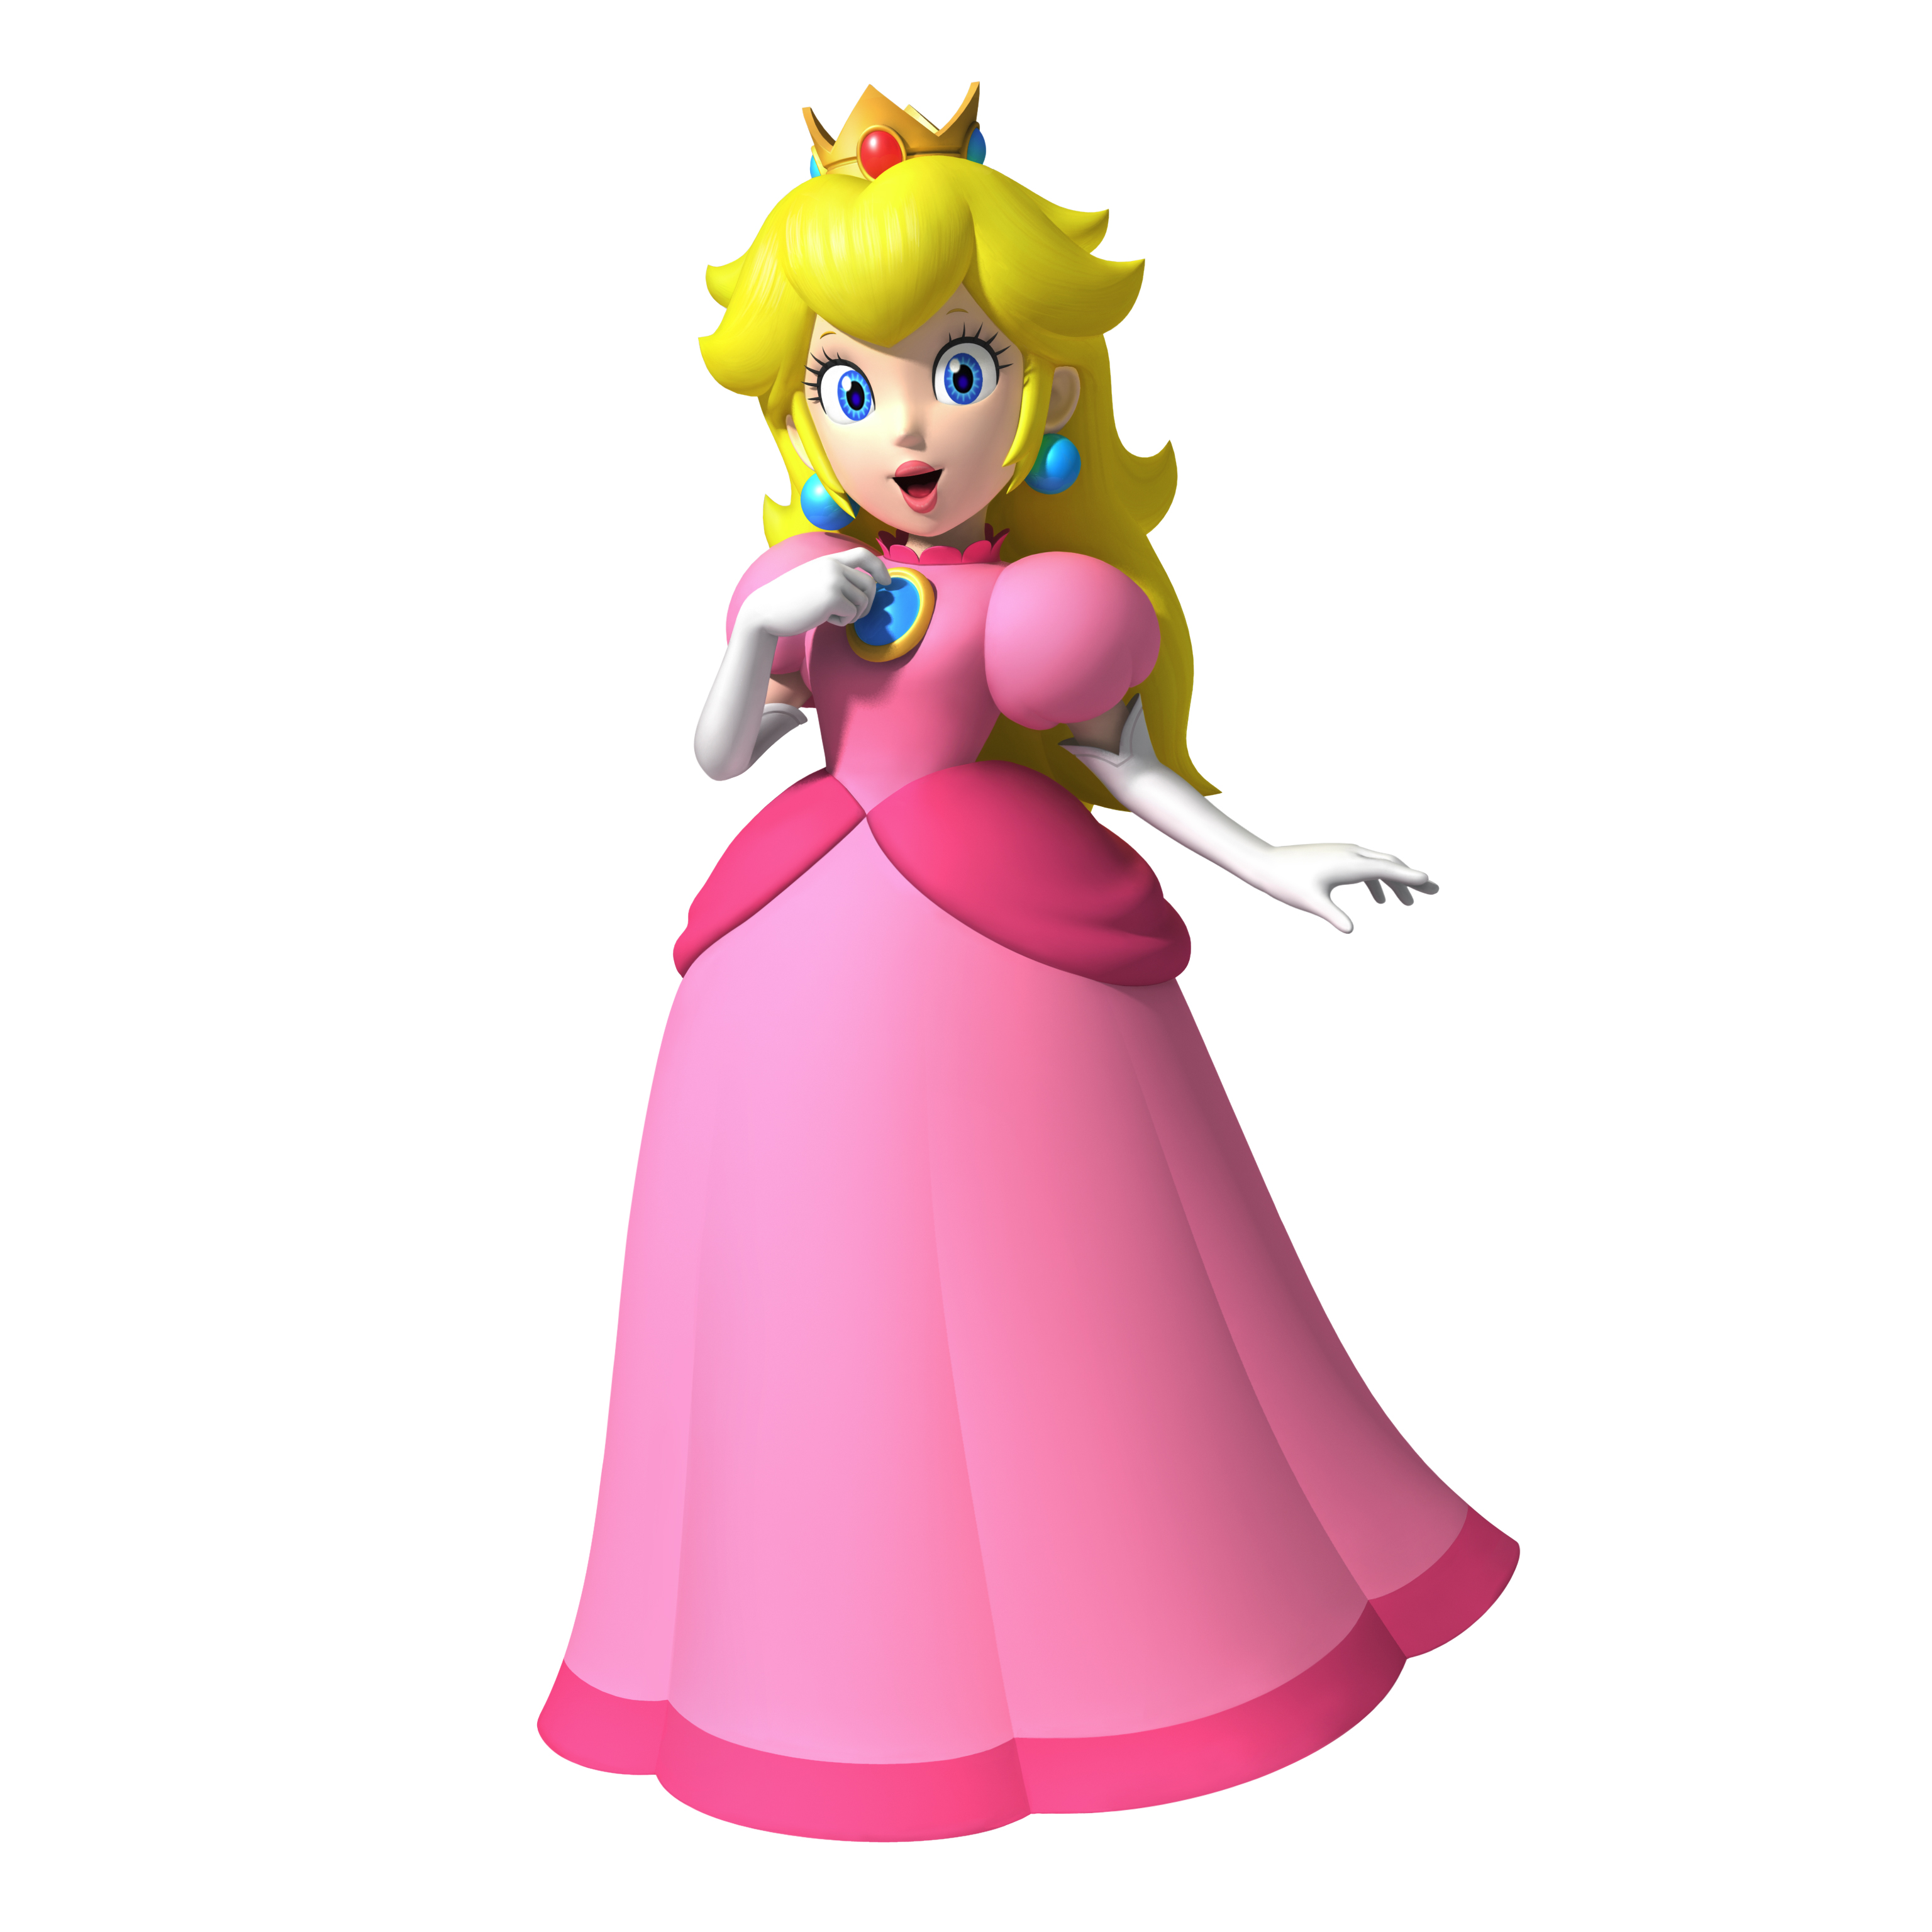 Clip Arts Related To : peach princess png. view all princess-mario-cliparts...